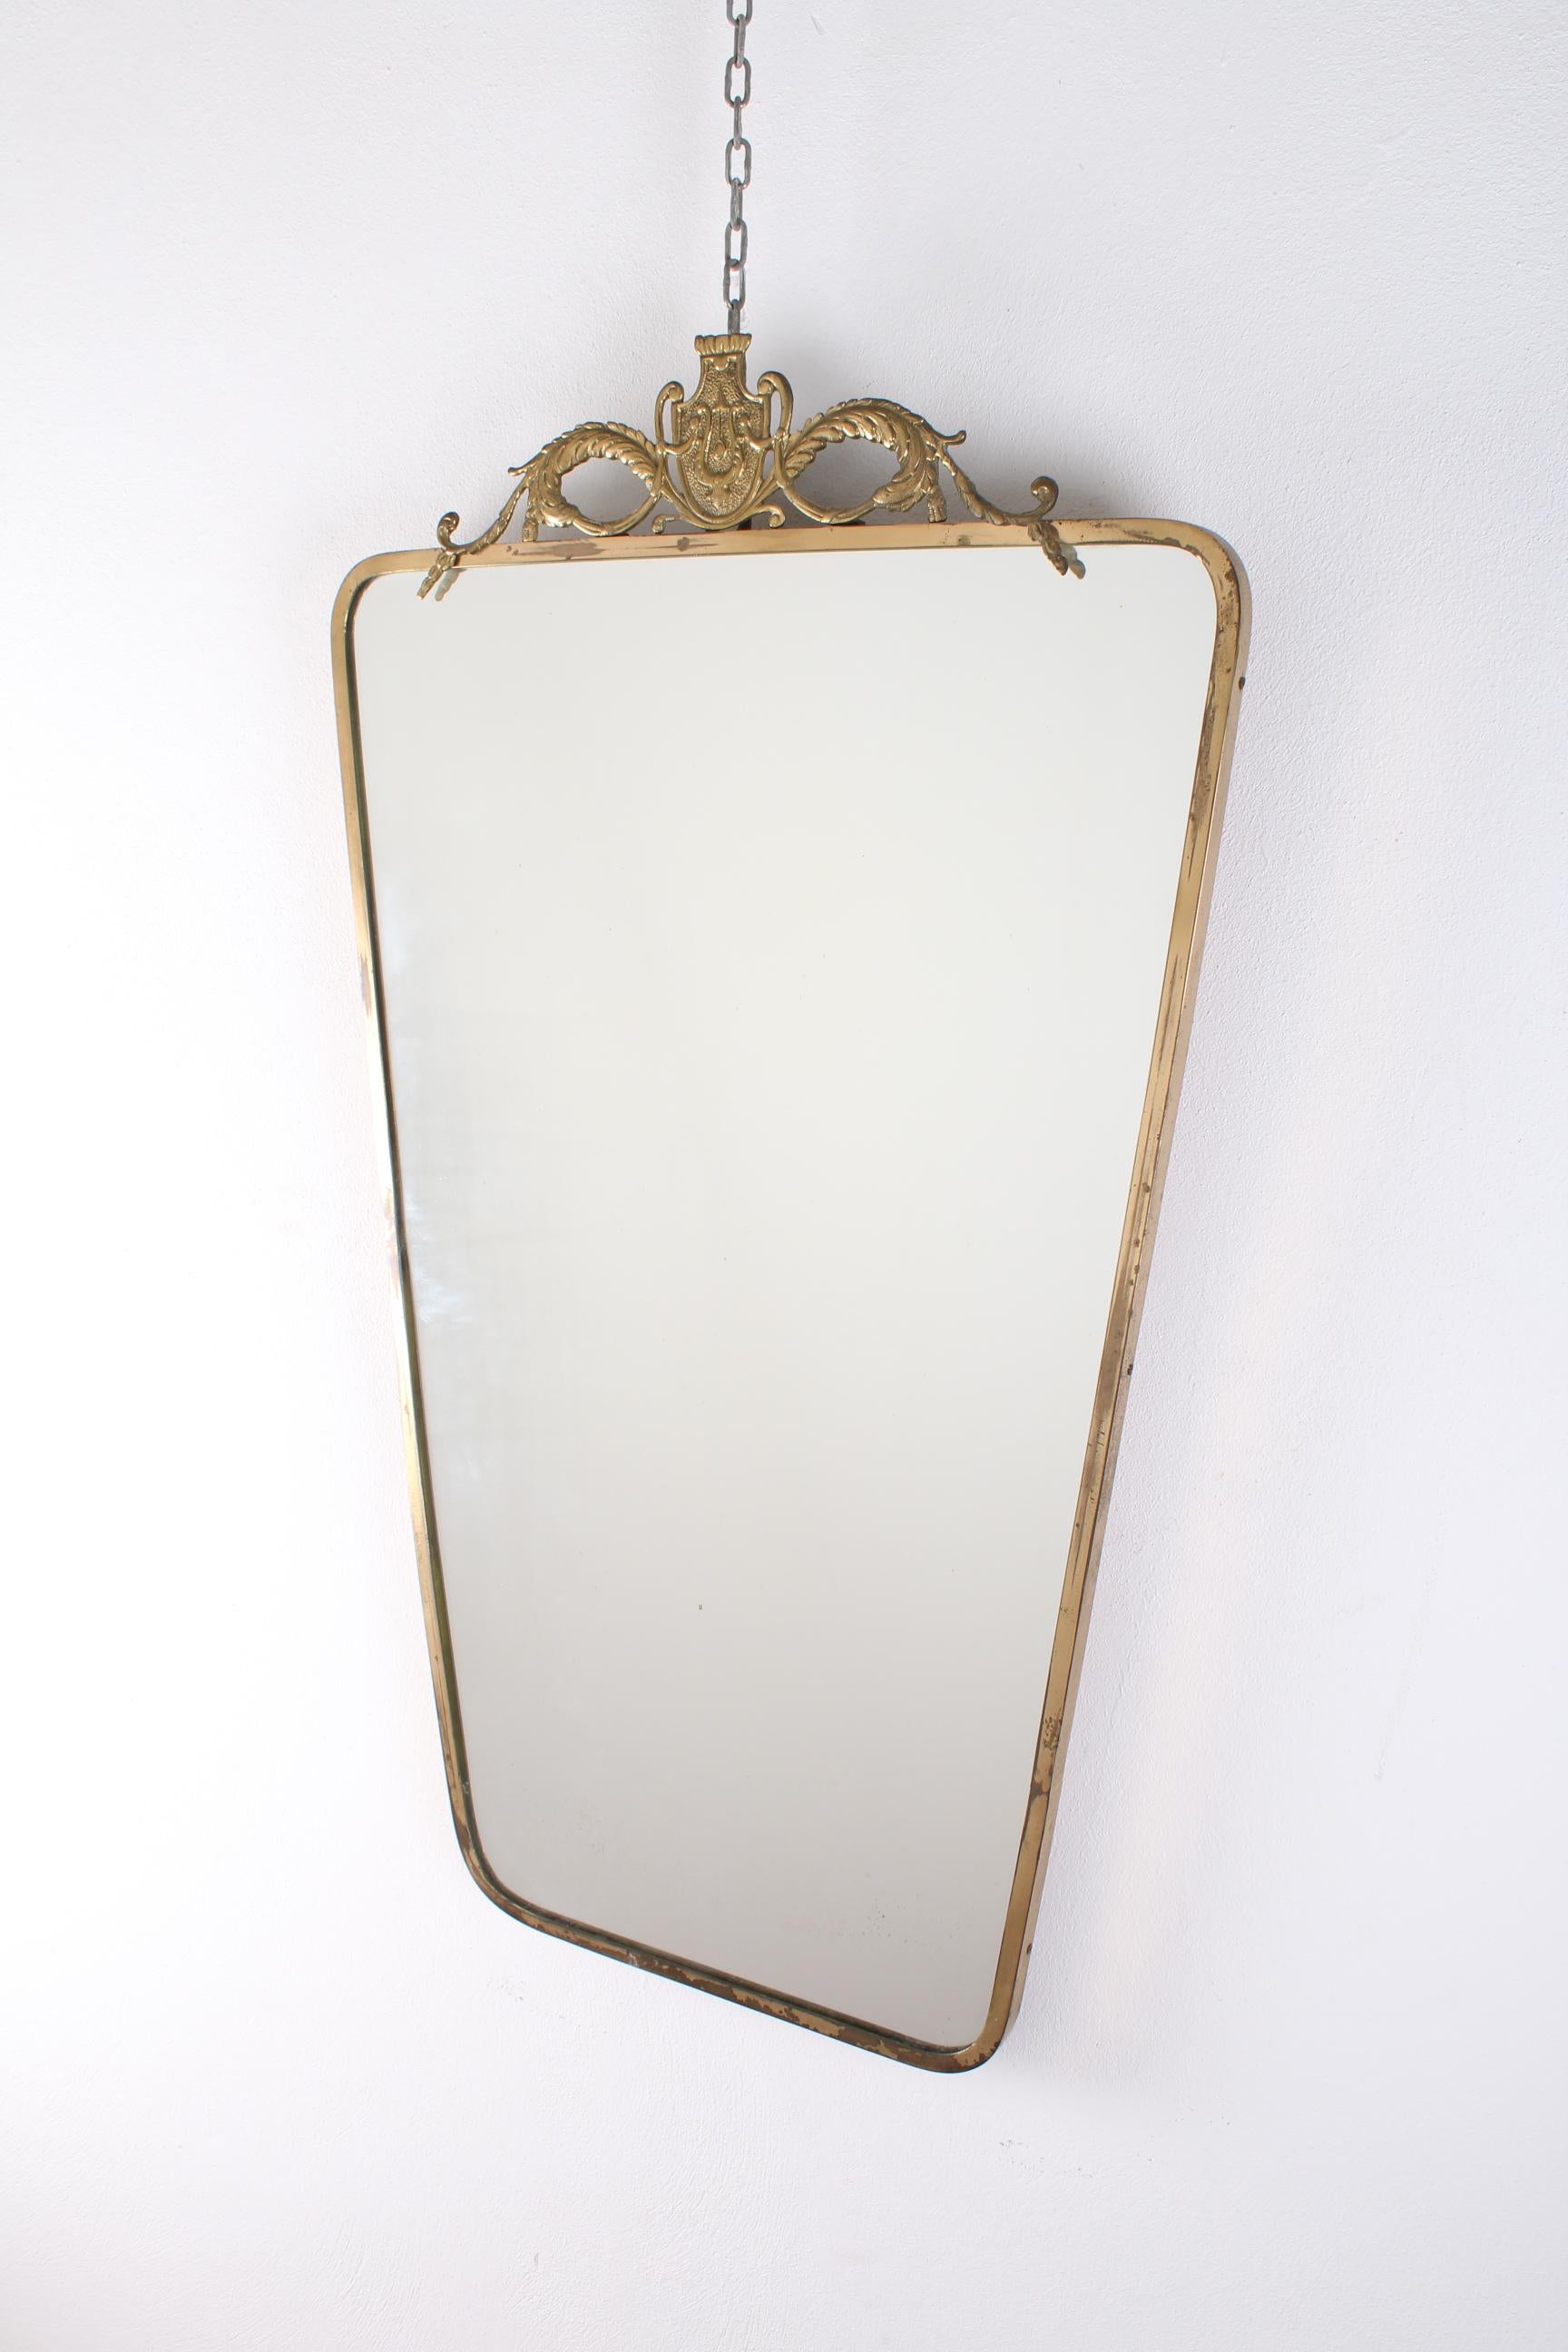 Art Deco Italian brass frame with a coat of arms. Wall mirror Pier Luigi Colli style.
Wear consistent with age and use.